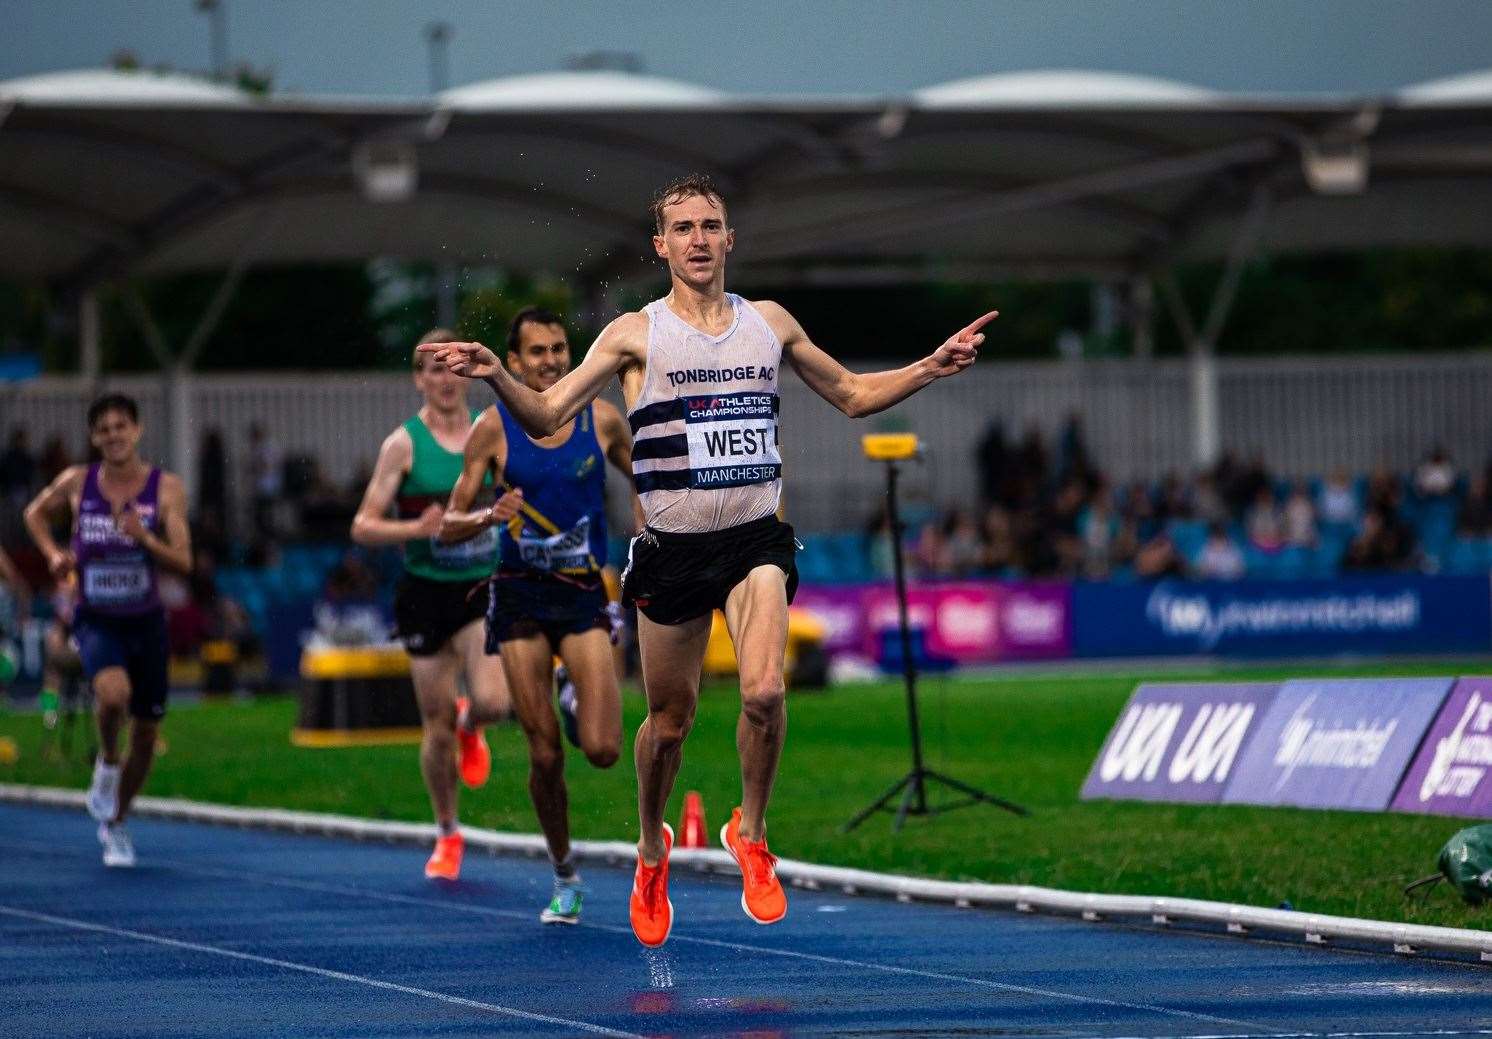 Kent's James West won the 5,000m British Championships in a wet Manchester earlier this month. Picture: Julie Fuster